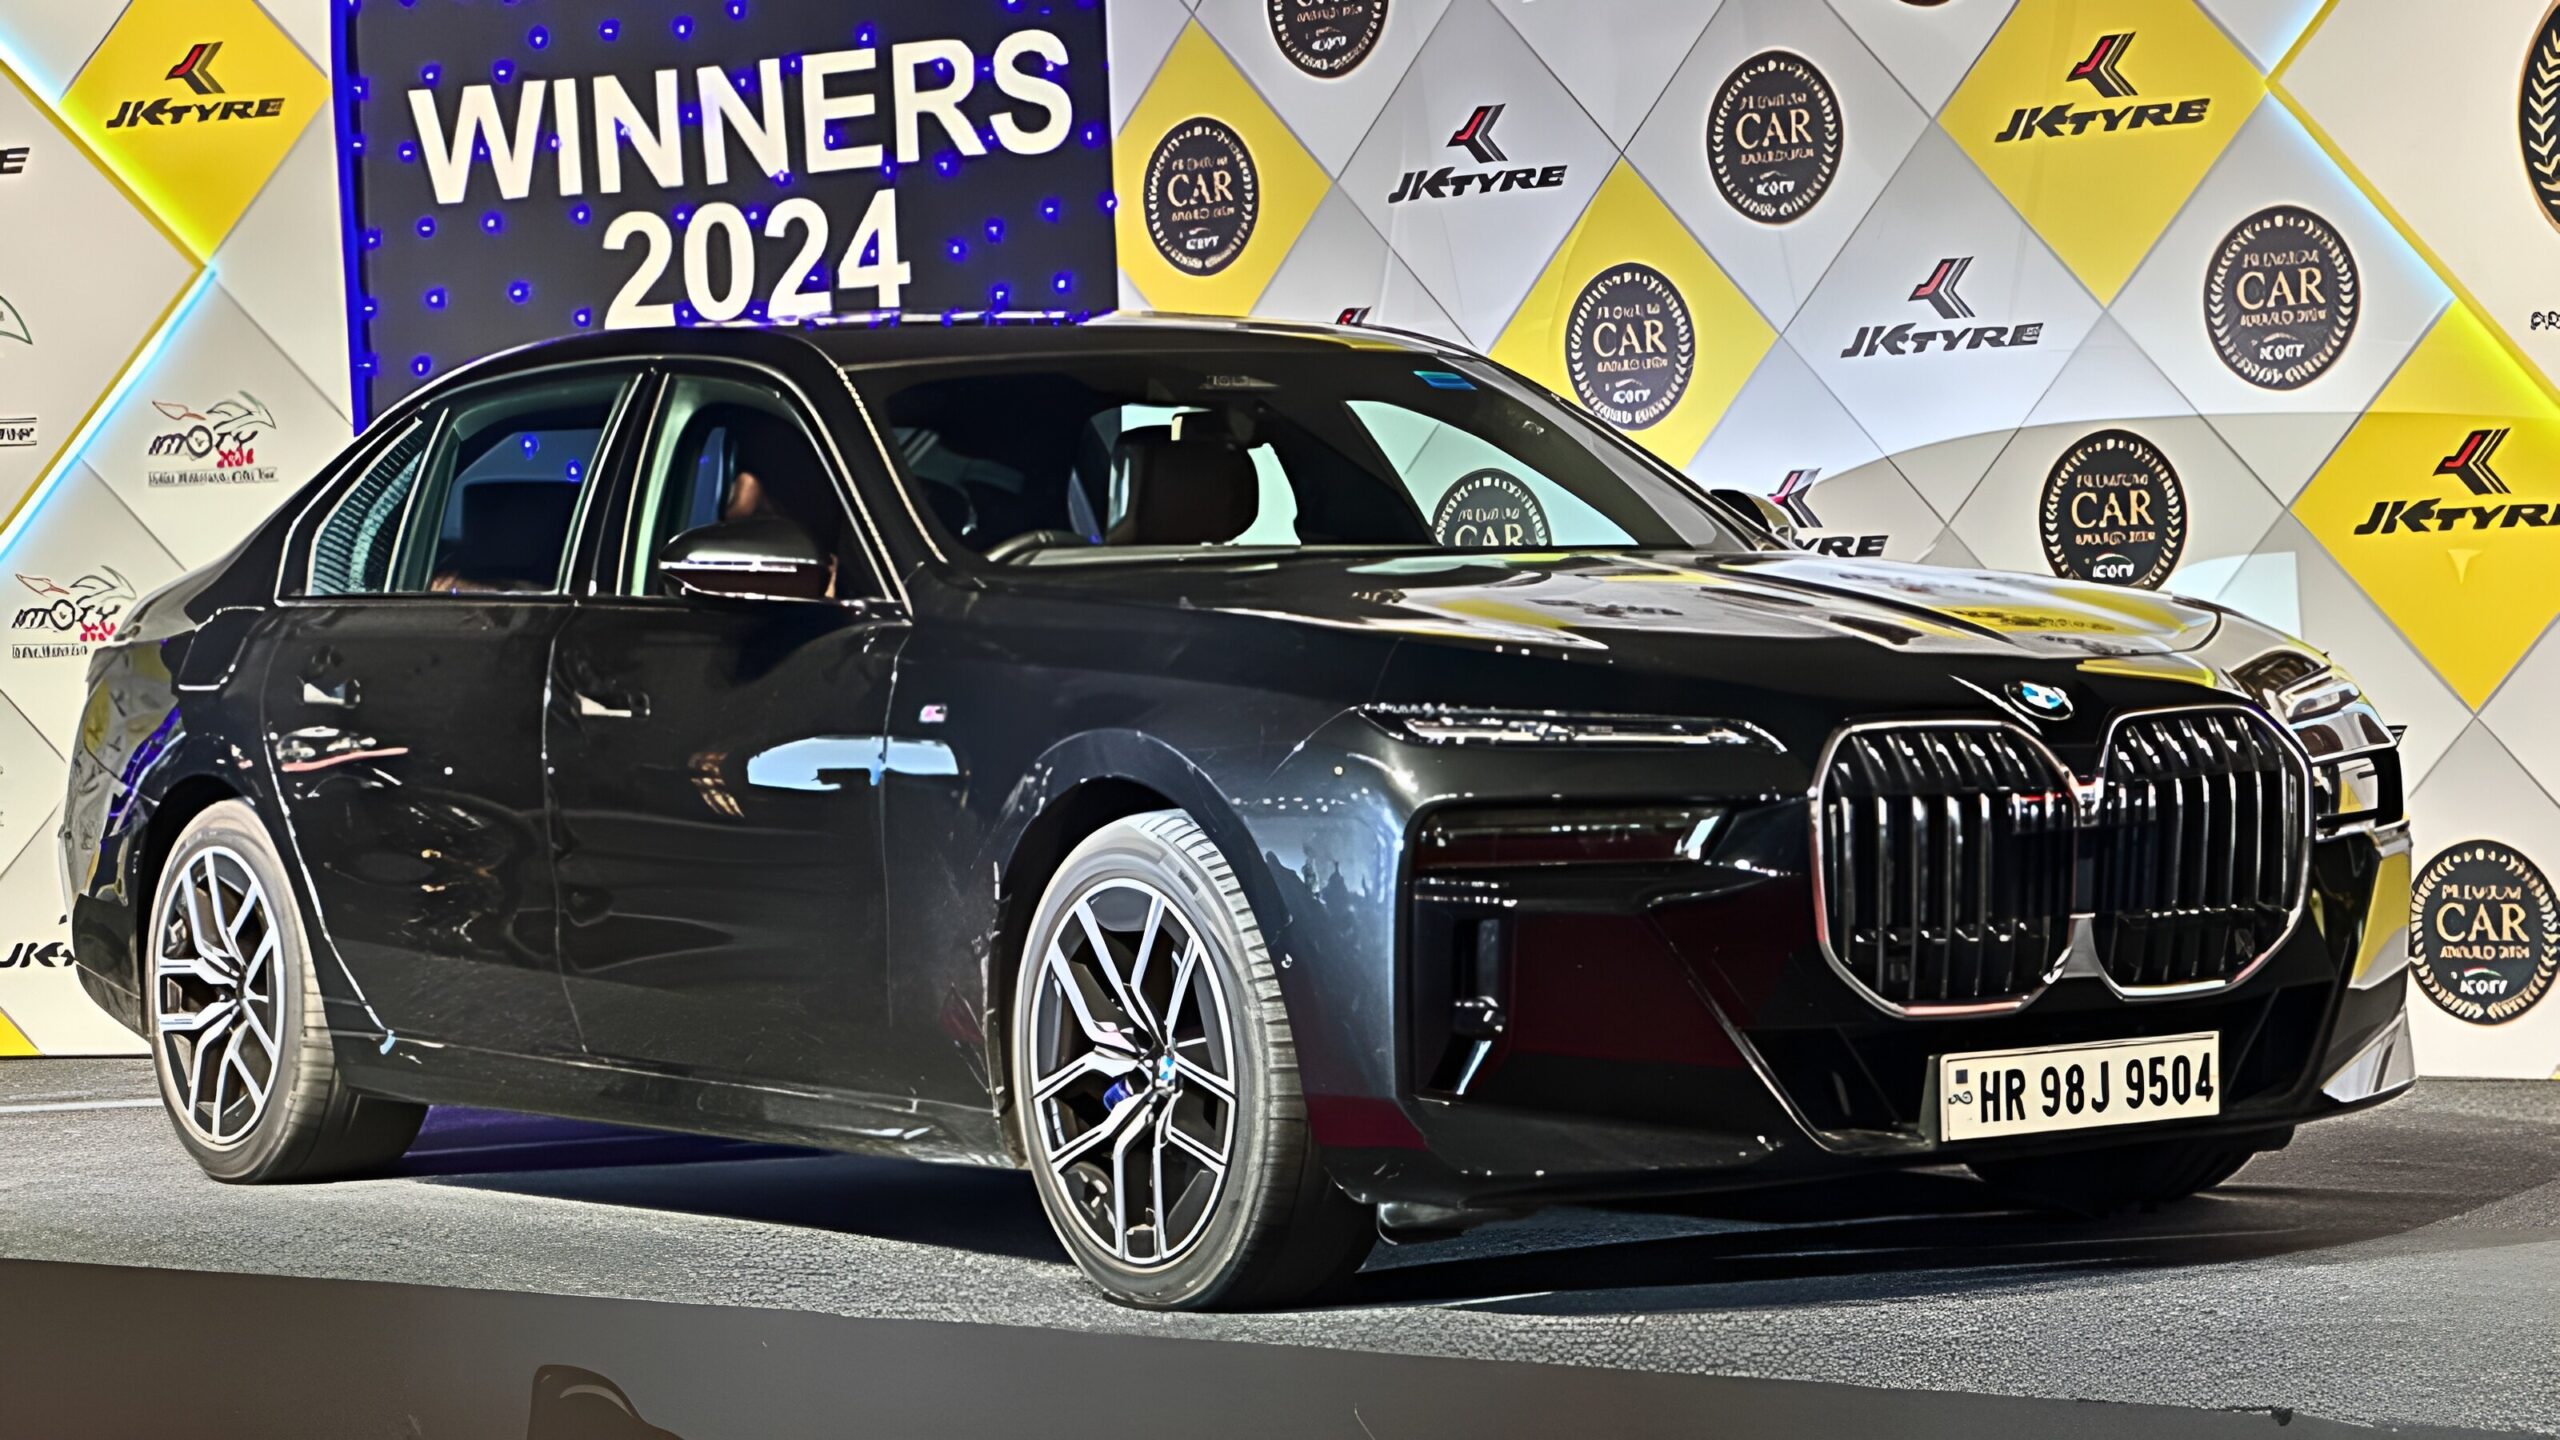 The 2024 Premium Car Award was Won by the BMW 7 Series with the Mercedes-Benz GLC securing the first runner-up position and the BMW X1 as the second runner-up. In the 2024 Premium Car Award by ICOTY, the shortlisted contenders featured the BMW 7 Series, Lexus LX, Mercedes-Benz GLC, Volvo C40 Recharge, Hyundai Ioniq 5, Lexus RX, Land Rover Range Rover Sport, and BMW X1. Previous recipients of this accolade include the Mercedes-Benz EQS 580, Mercedes-Benz S-Class, Land Rover Defender, and BMW 3 Series (G20).